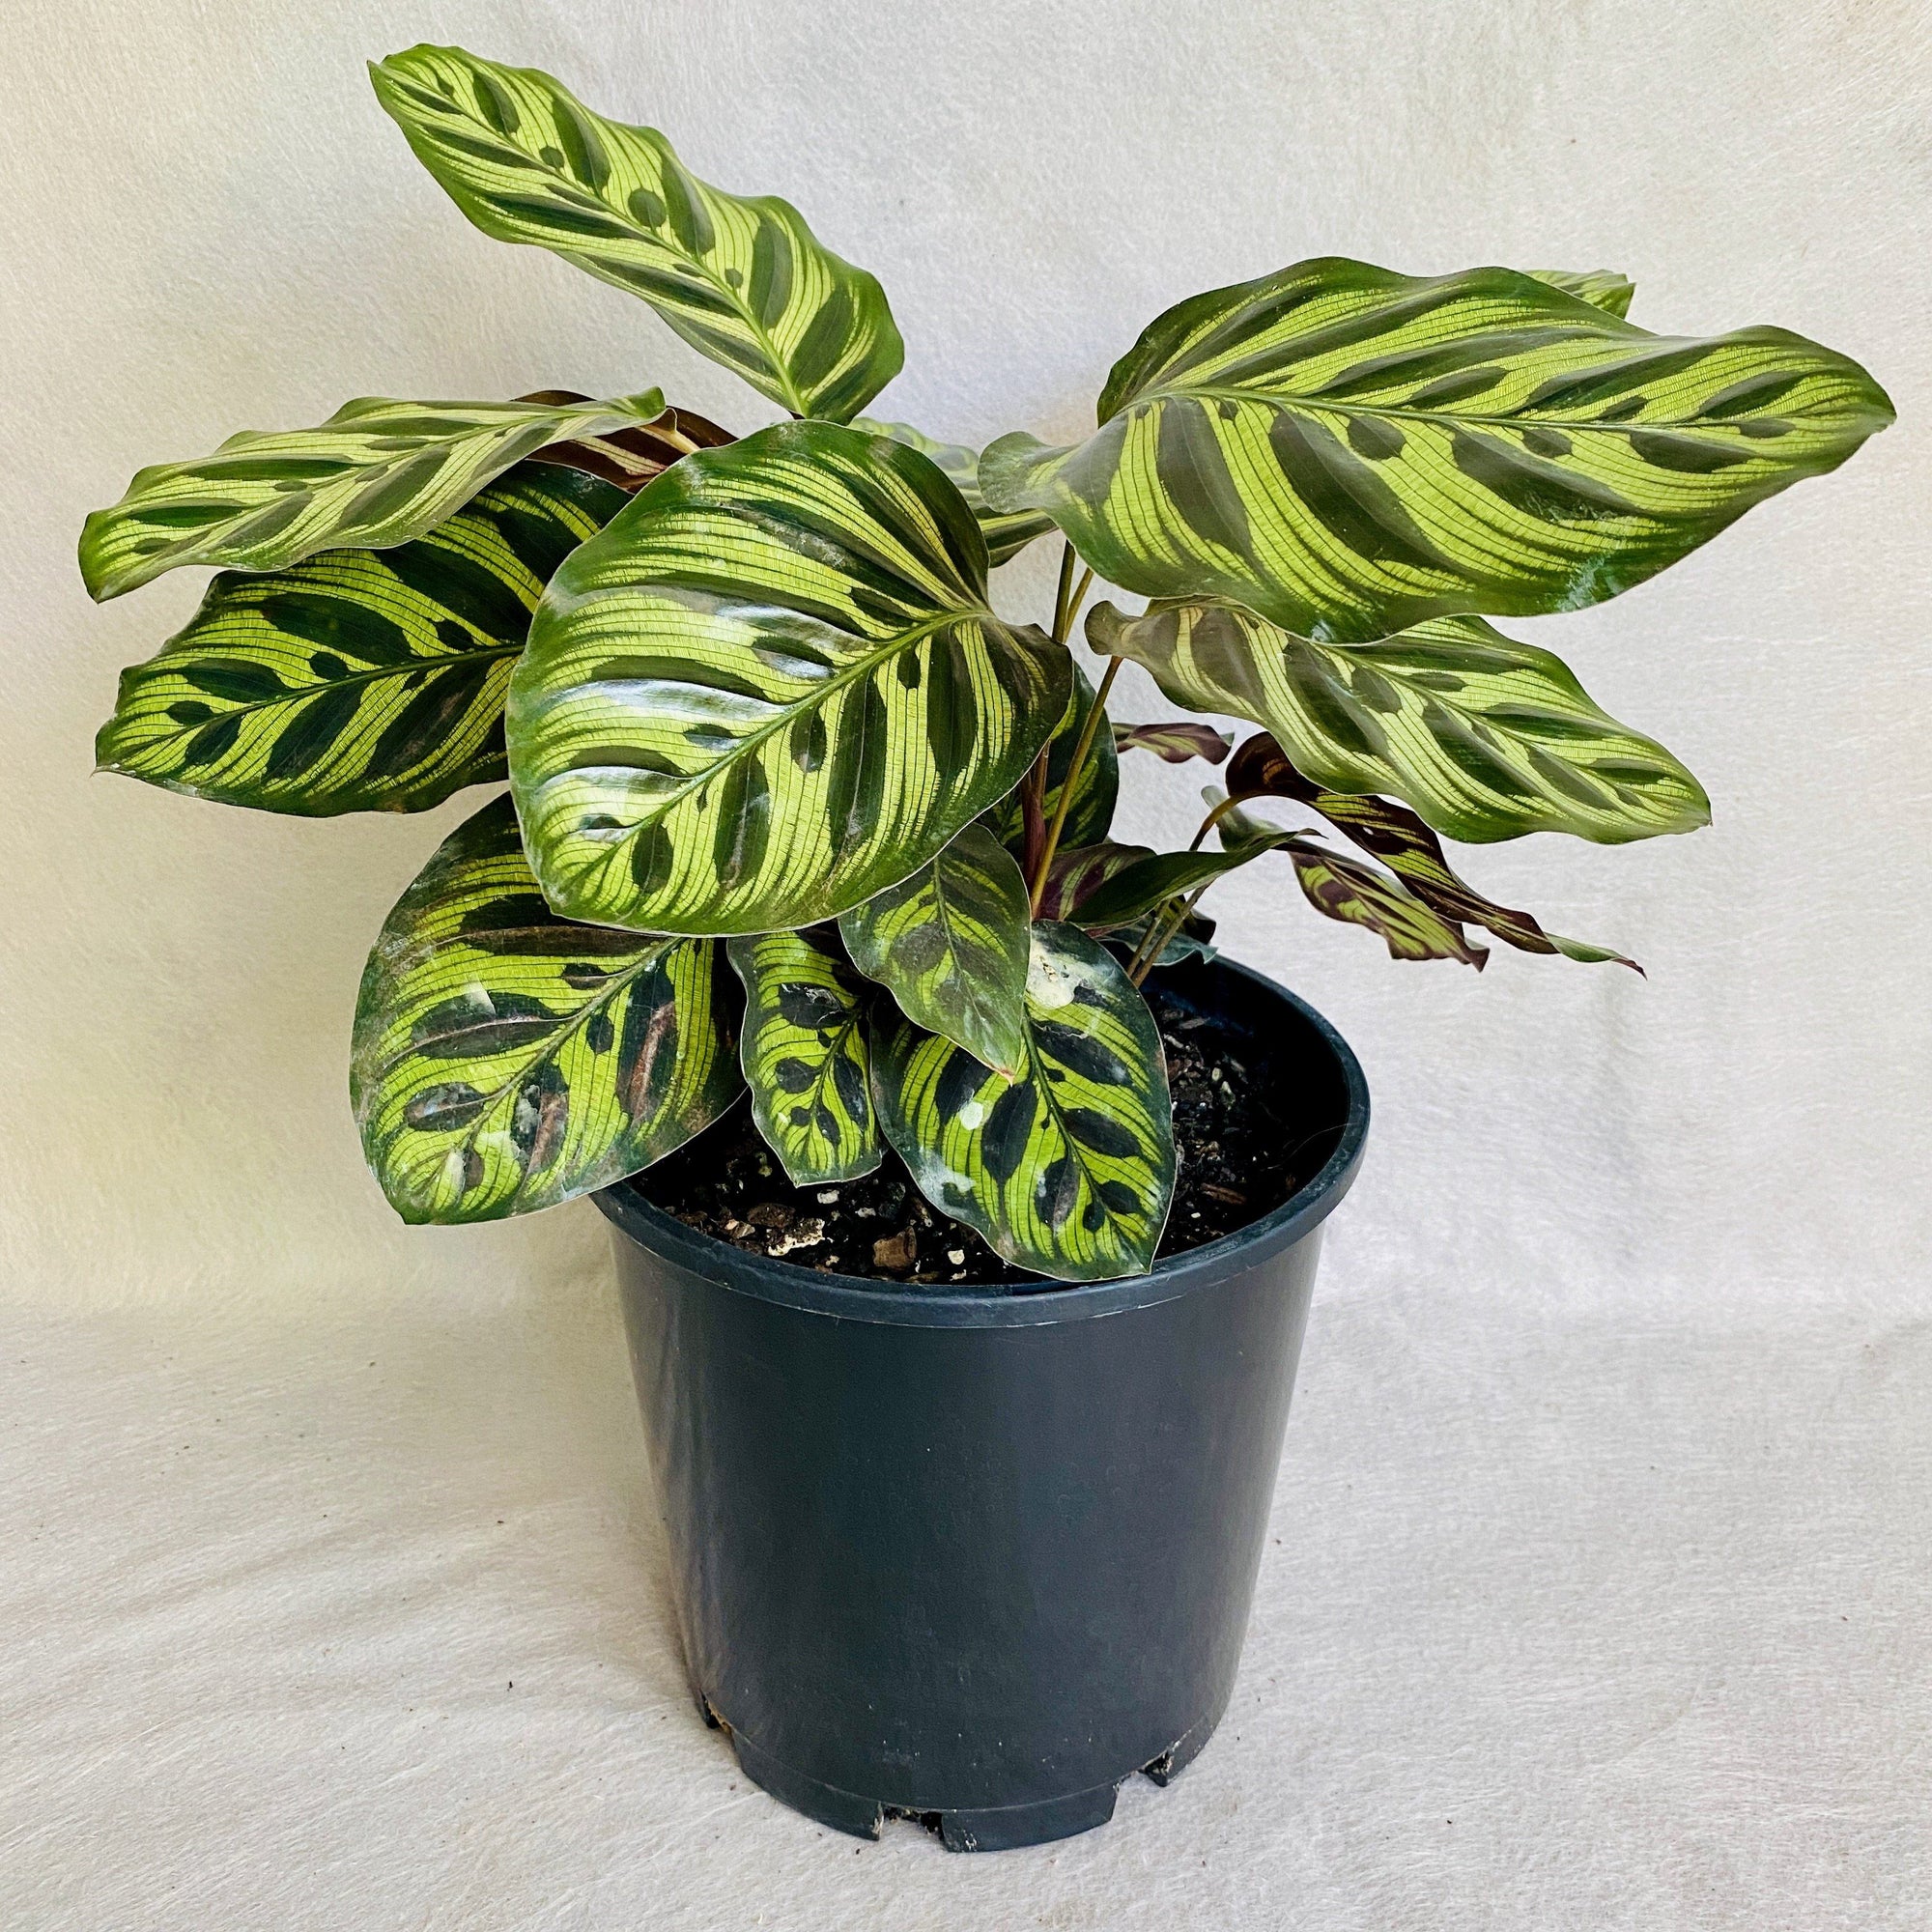 Calathea makoyana is a beautiful tropical houseplant, famed for its beautiful, contrasting green and purplish-red leaves